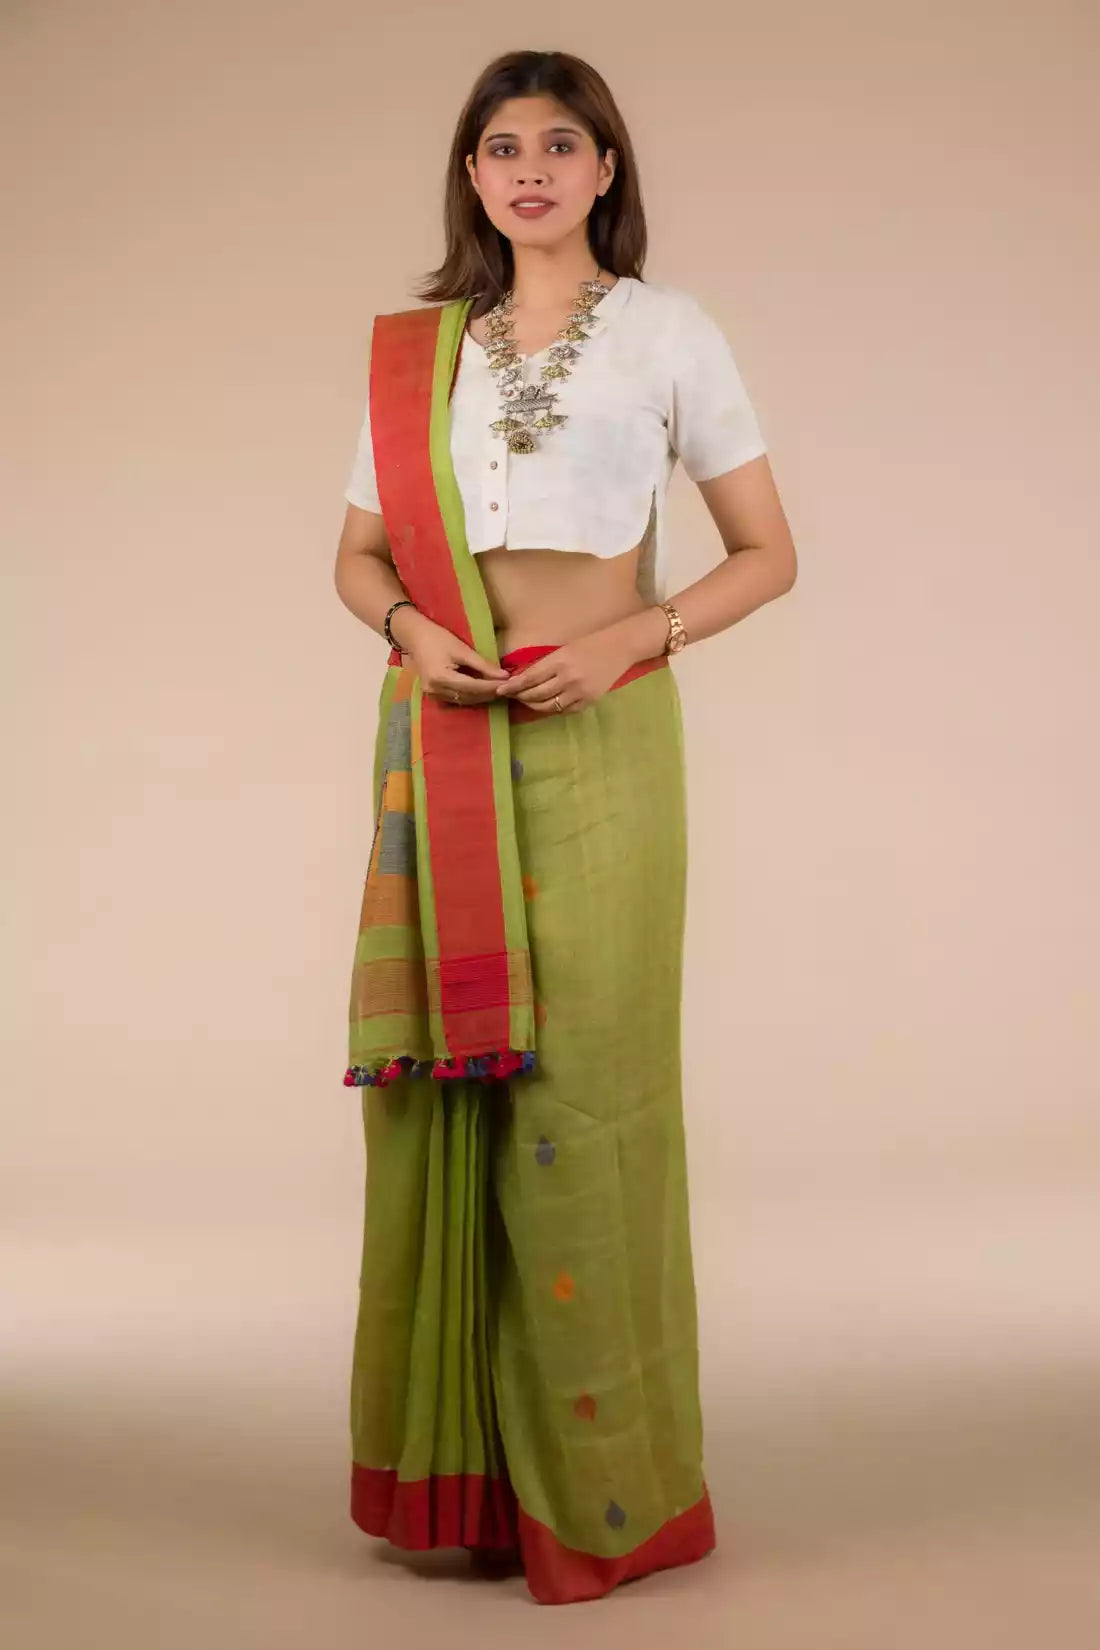  Image of a woman in Parrot Green Jamdani Pure Linen Saree, a business formal for women standing in front of a beige backdrop